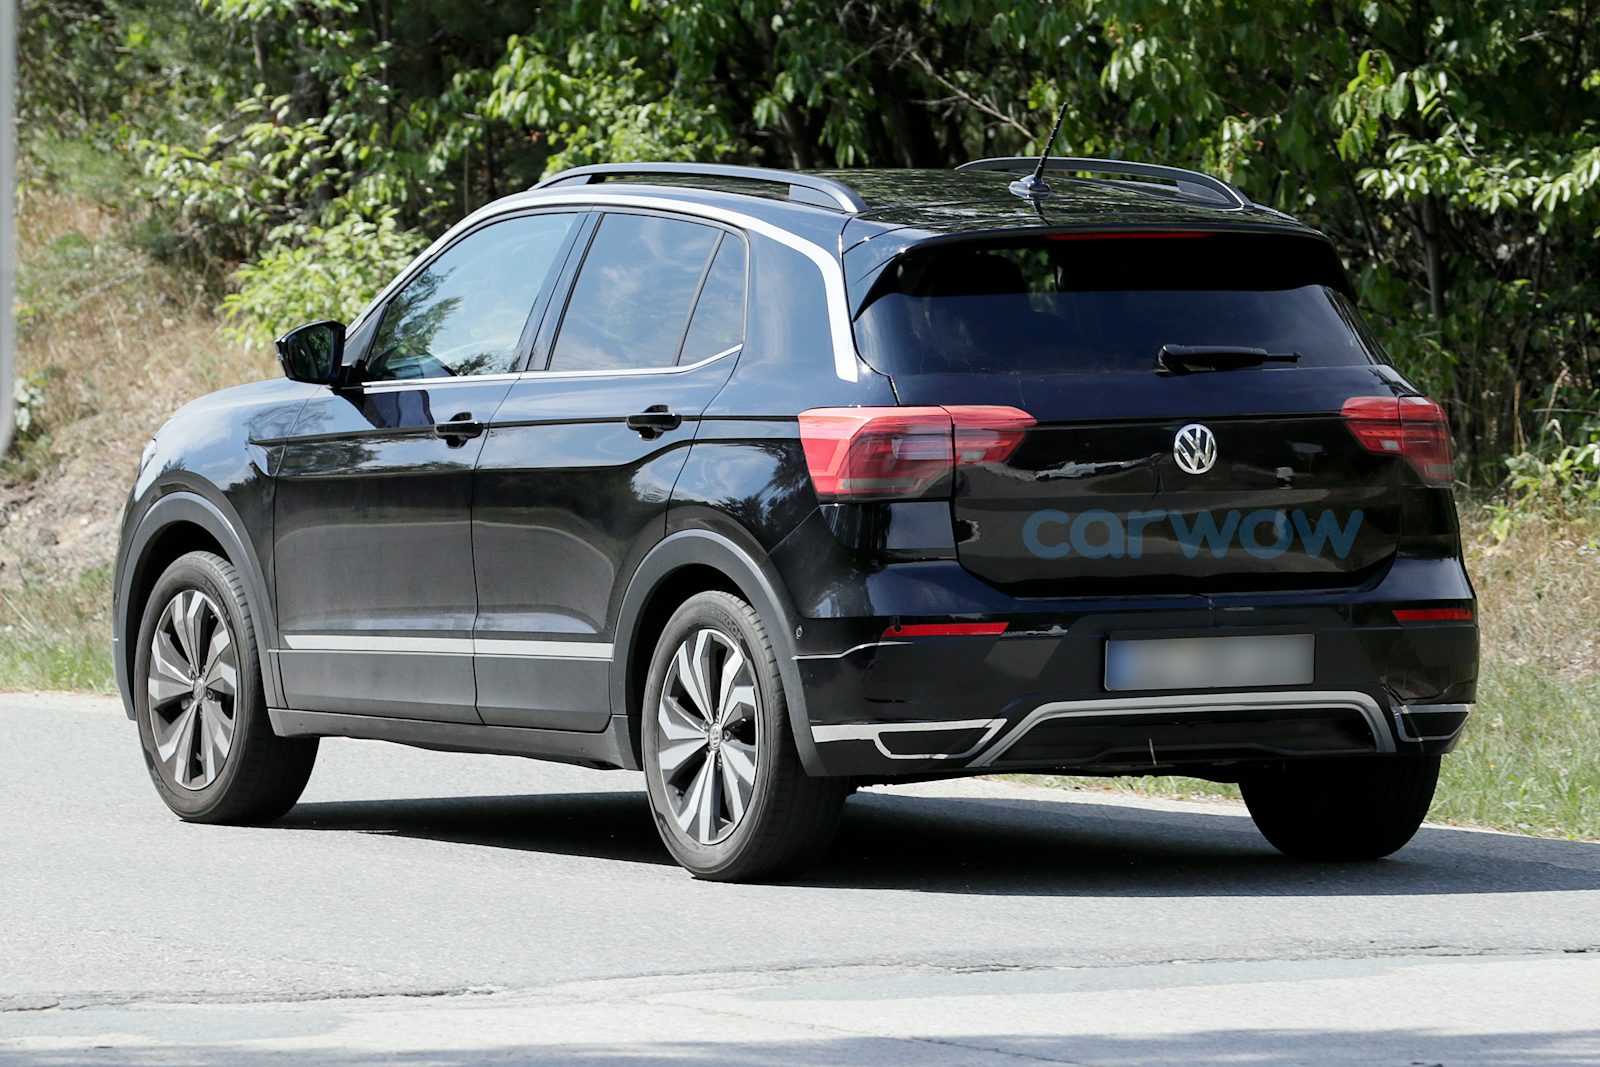 2019 VW TCross SUV price, specs and release date carwow